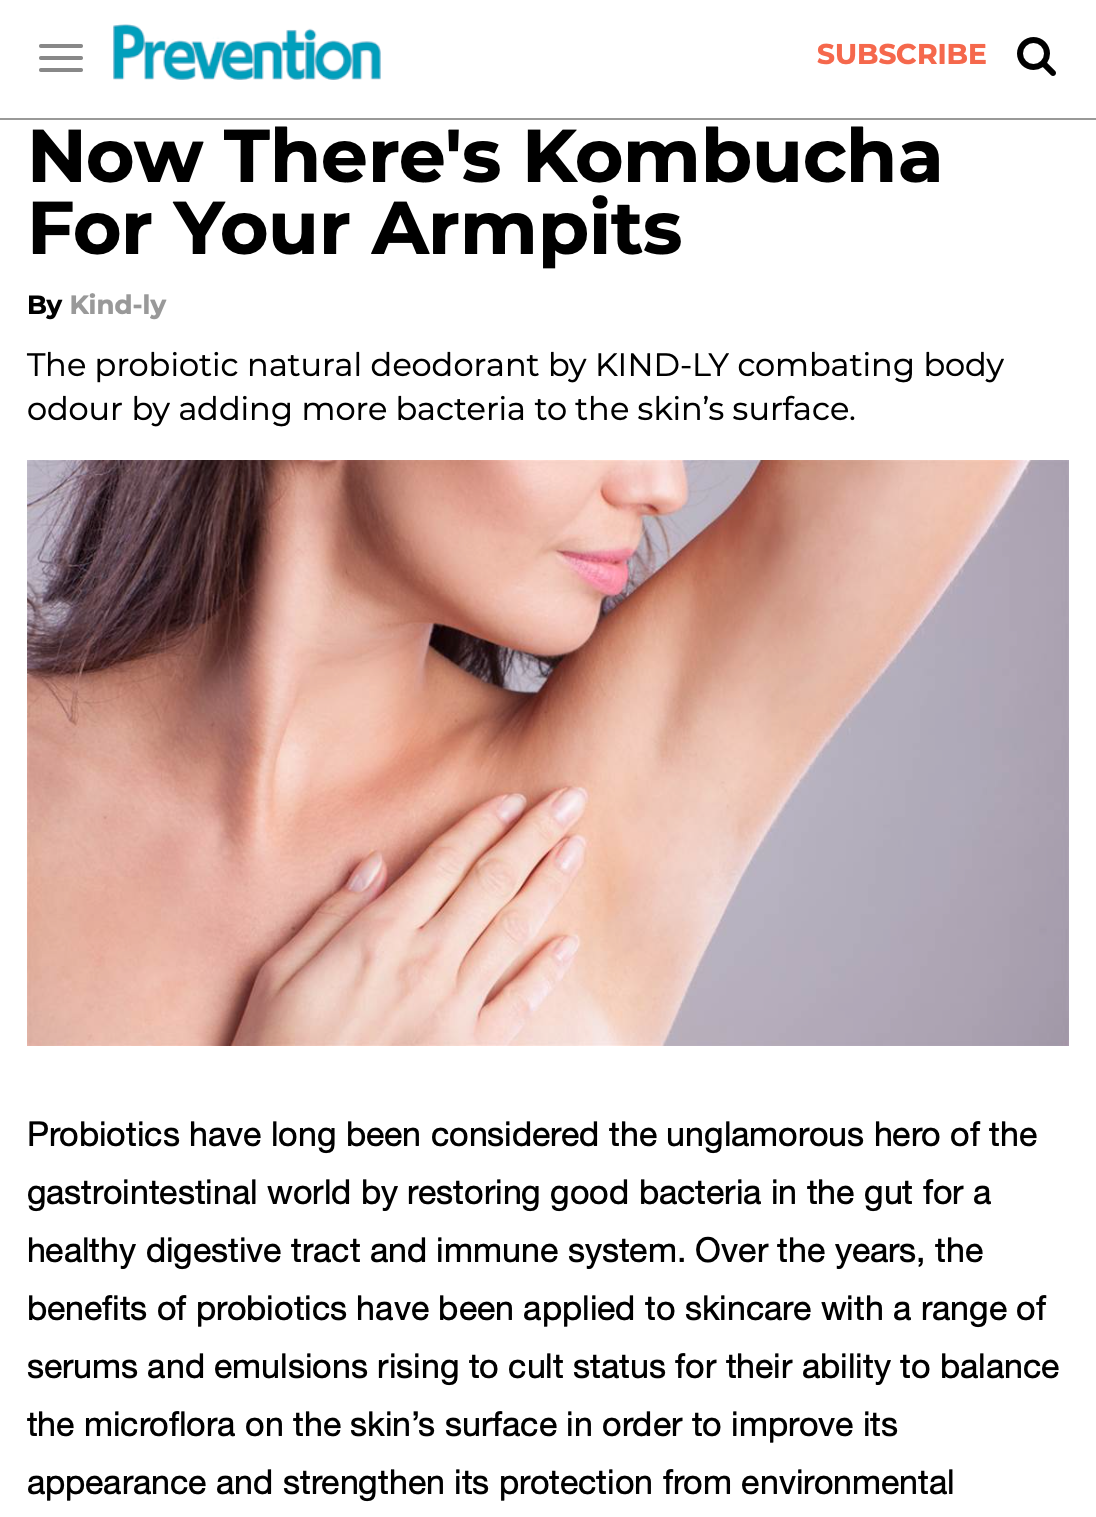 Prevention Magazine: Now There's Kombucha For Your Armpits – KIND-LY